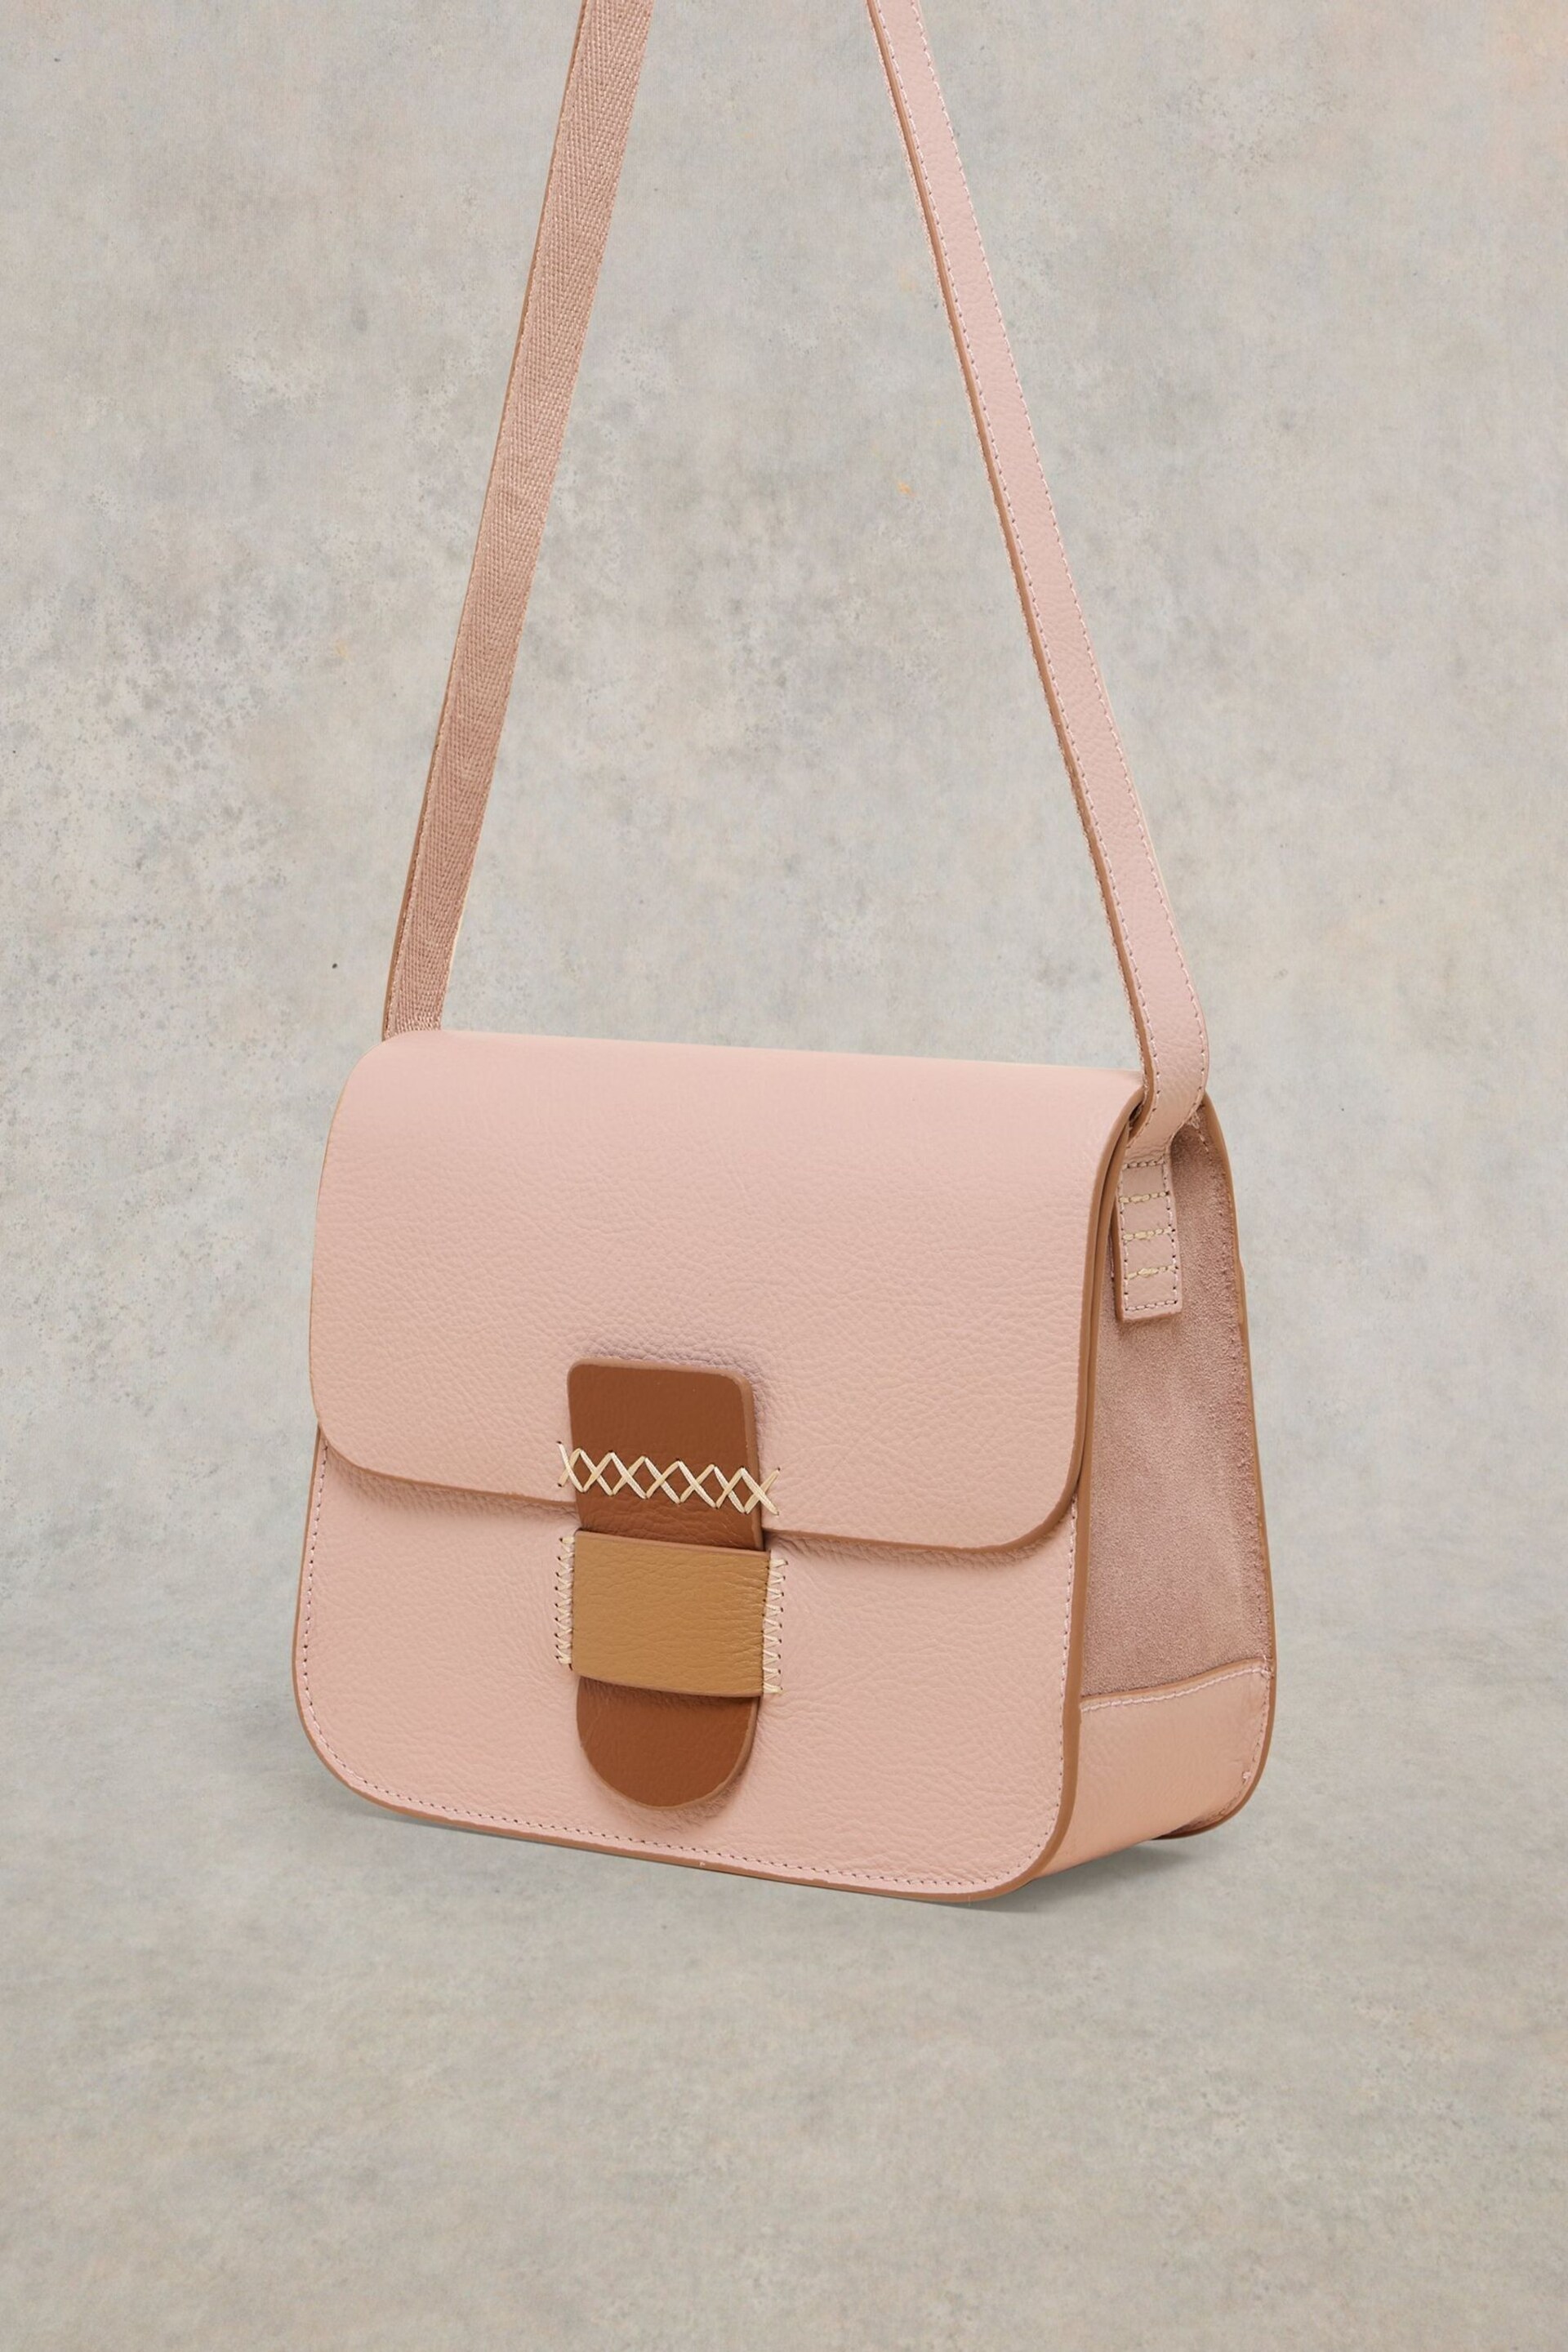 White Stuff Pink Evie Leather Satchel Bag - Image 3 of 4